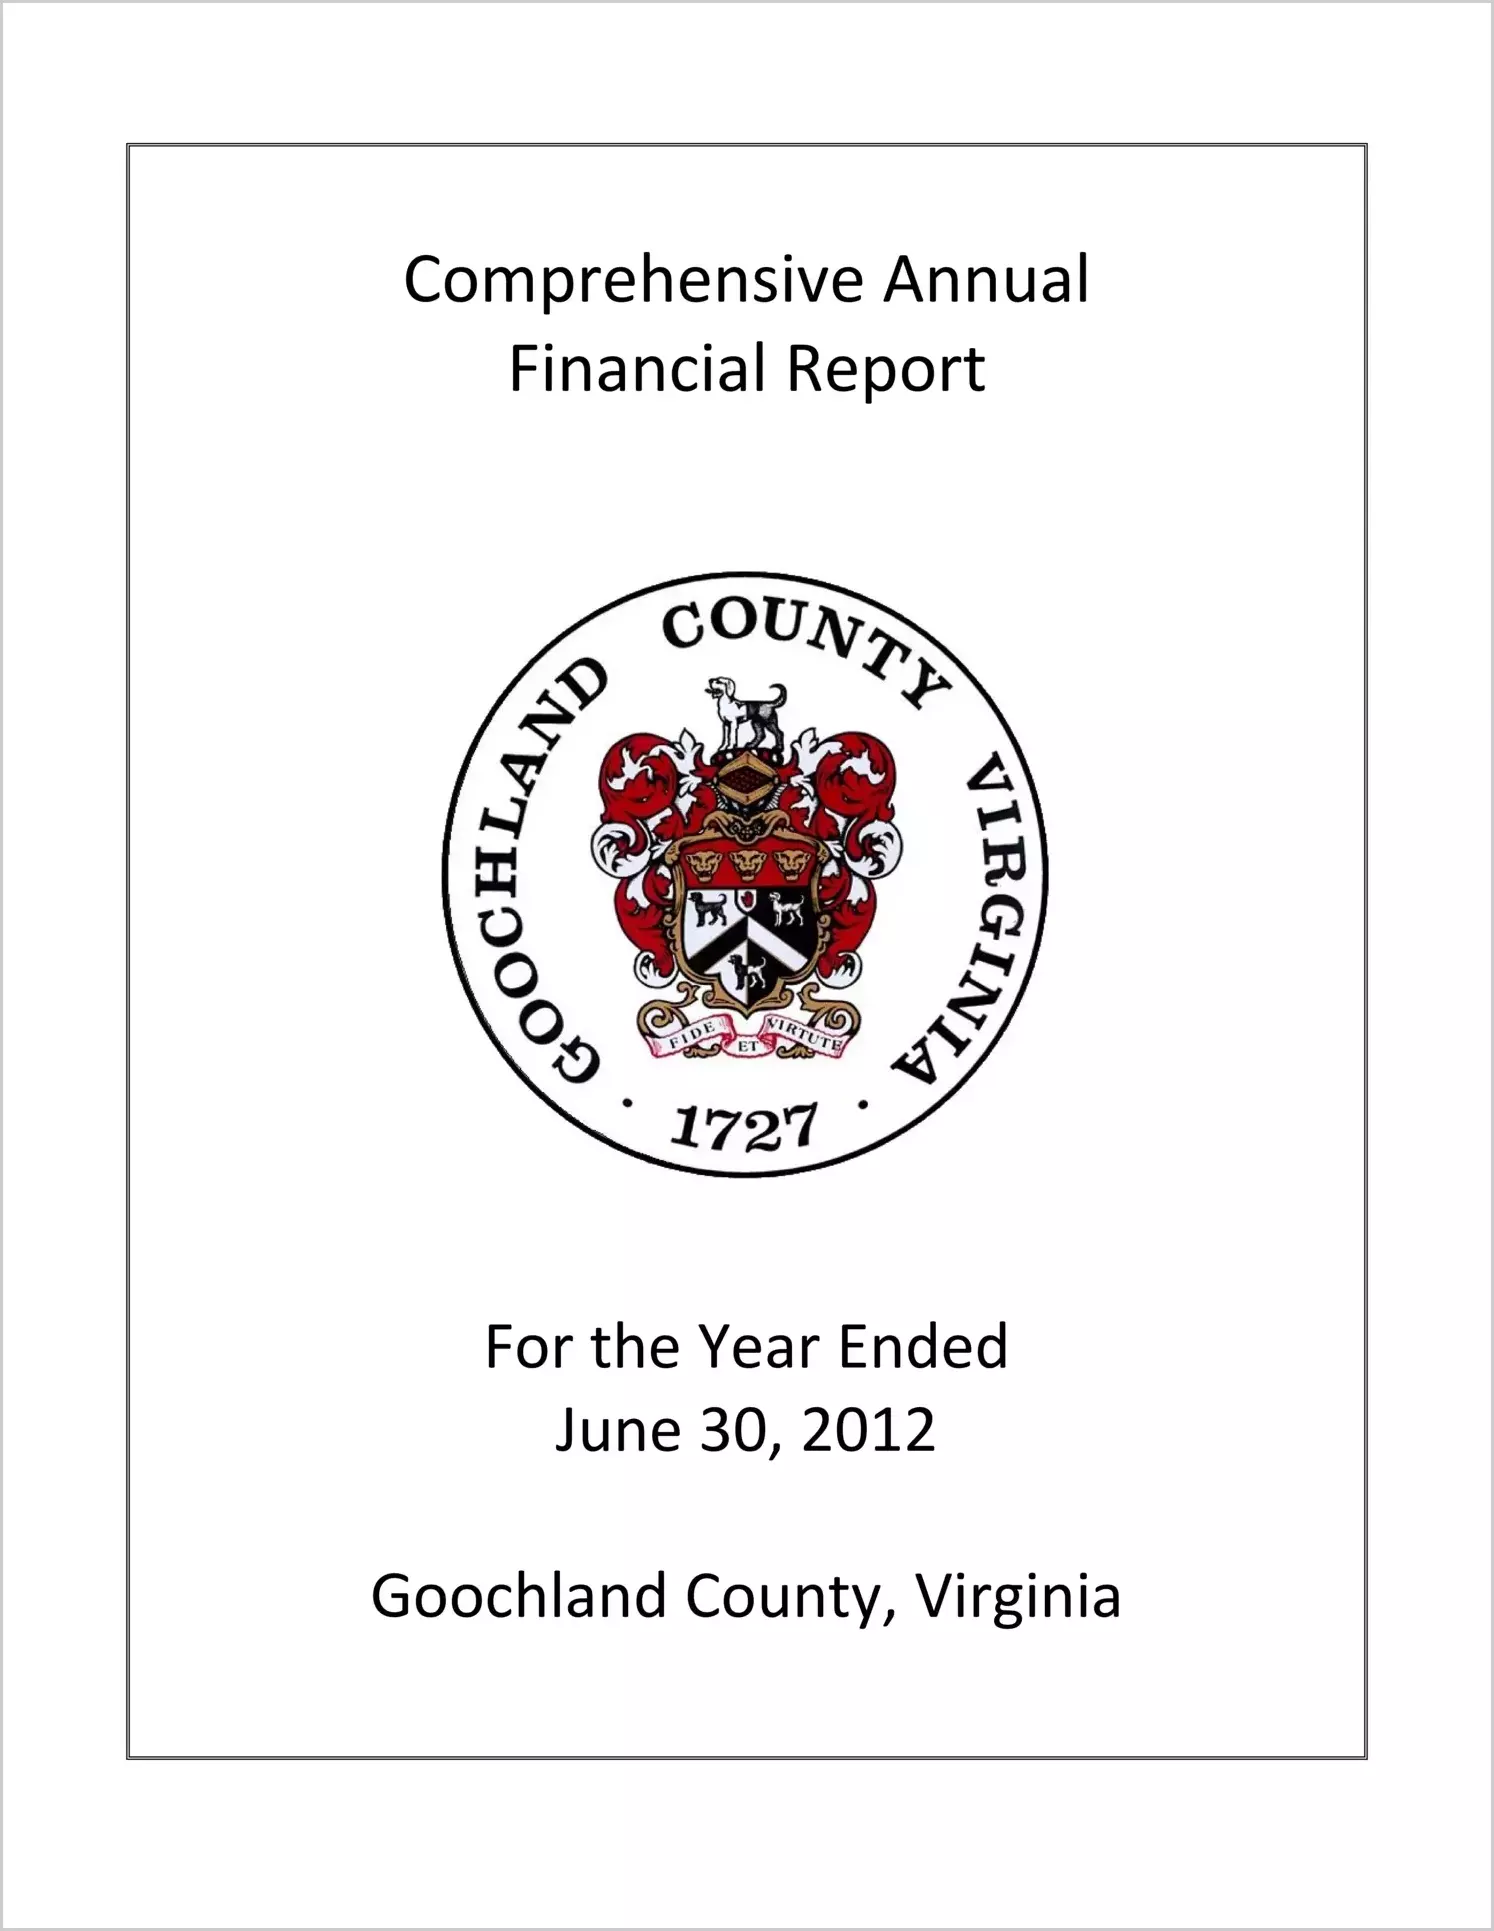 2012 Annual Financial Report for County of Goochland